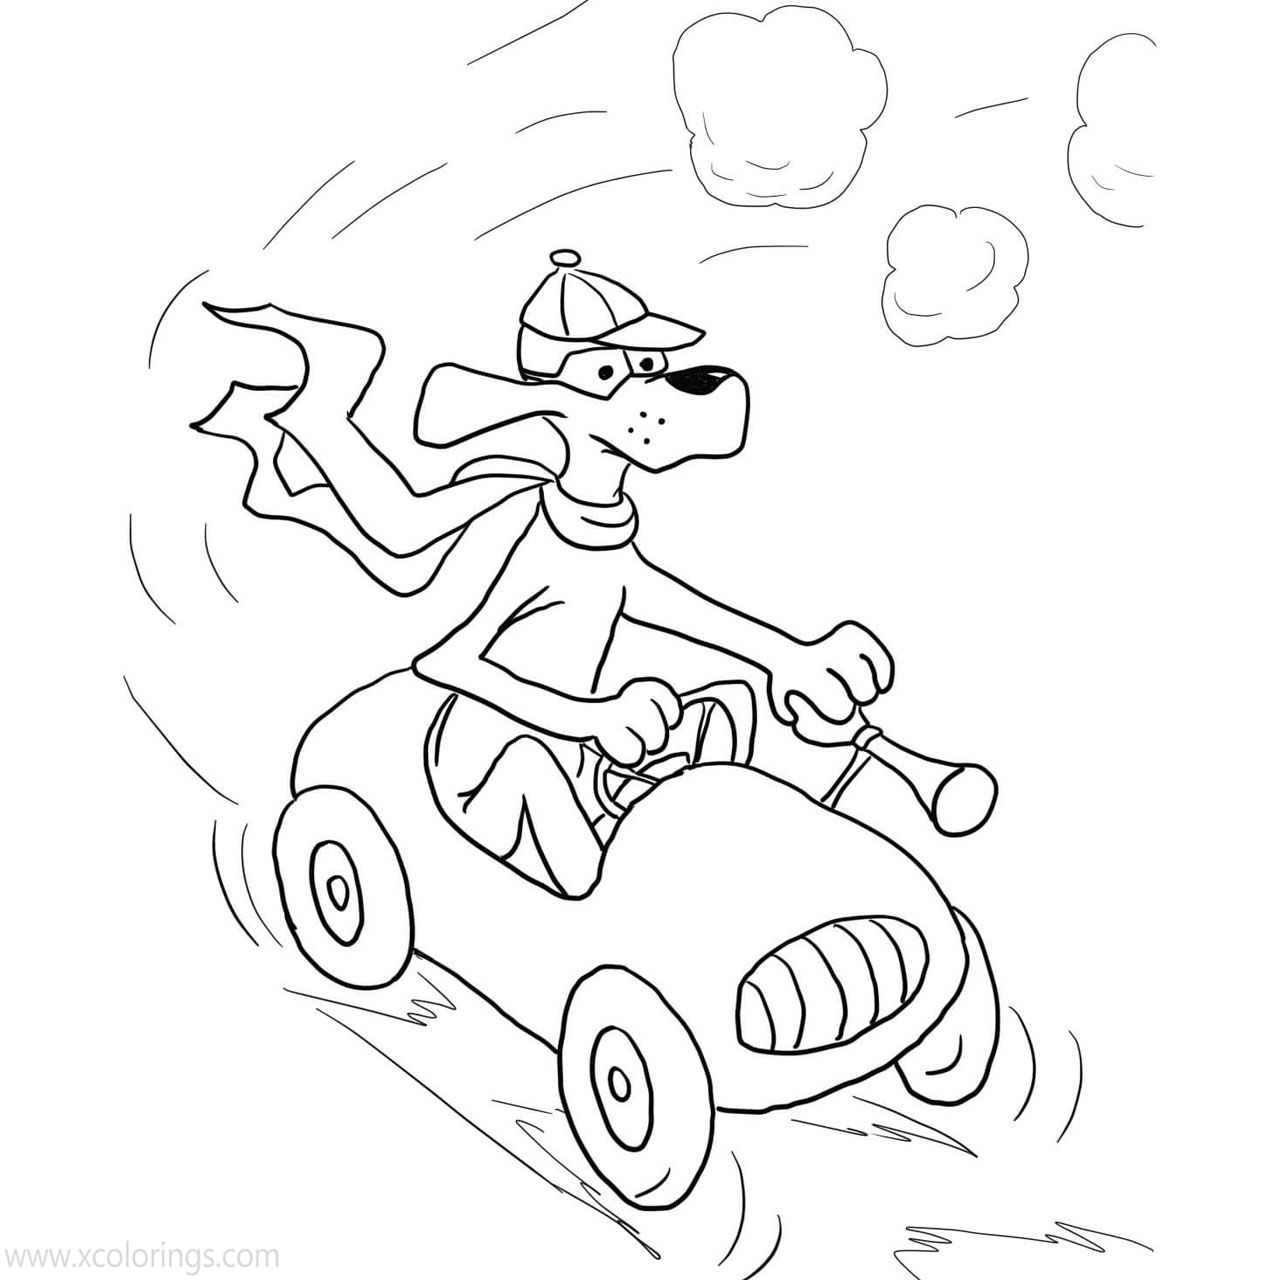 Free Go Dog Go Coloring Pges Boy Dog Driving the Car printable